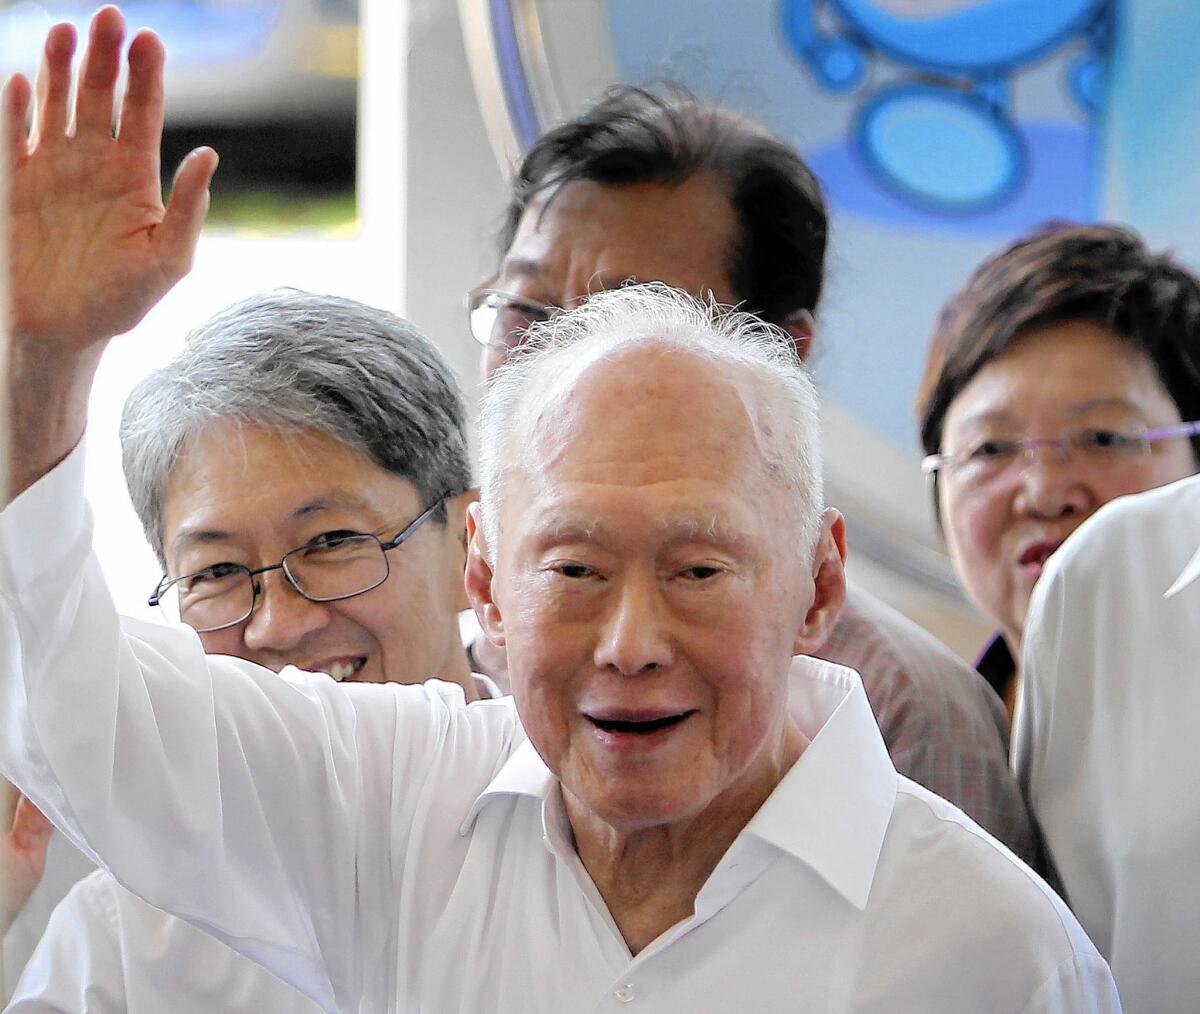 Singapore's former prime minister, Lee Kuan Yew, waves to supporters as he arrives at an elections nomination center in Singapore.